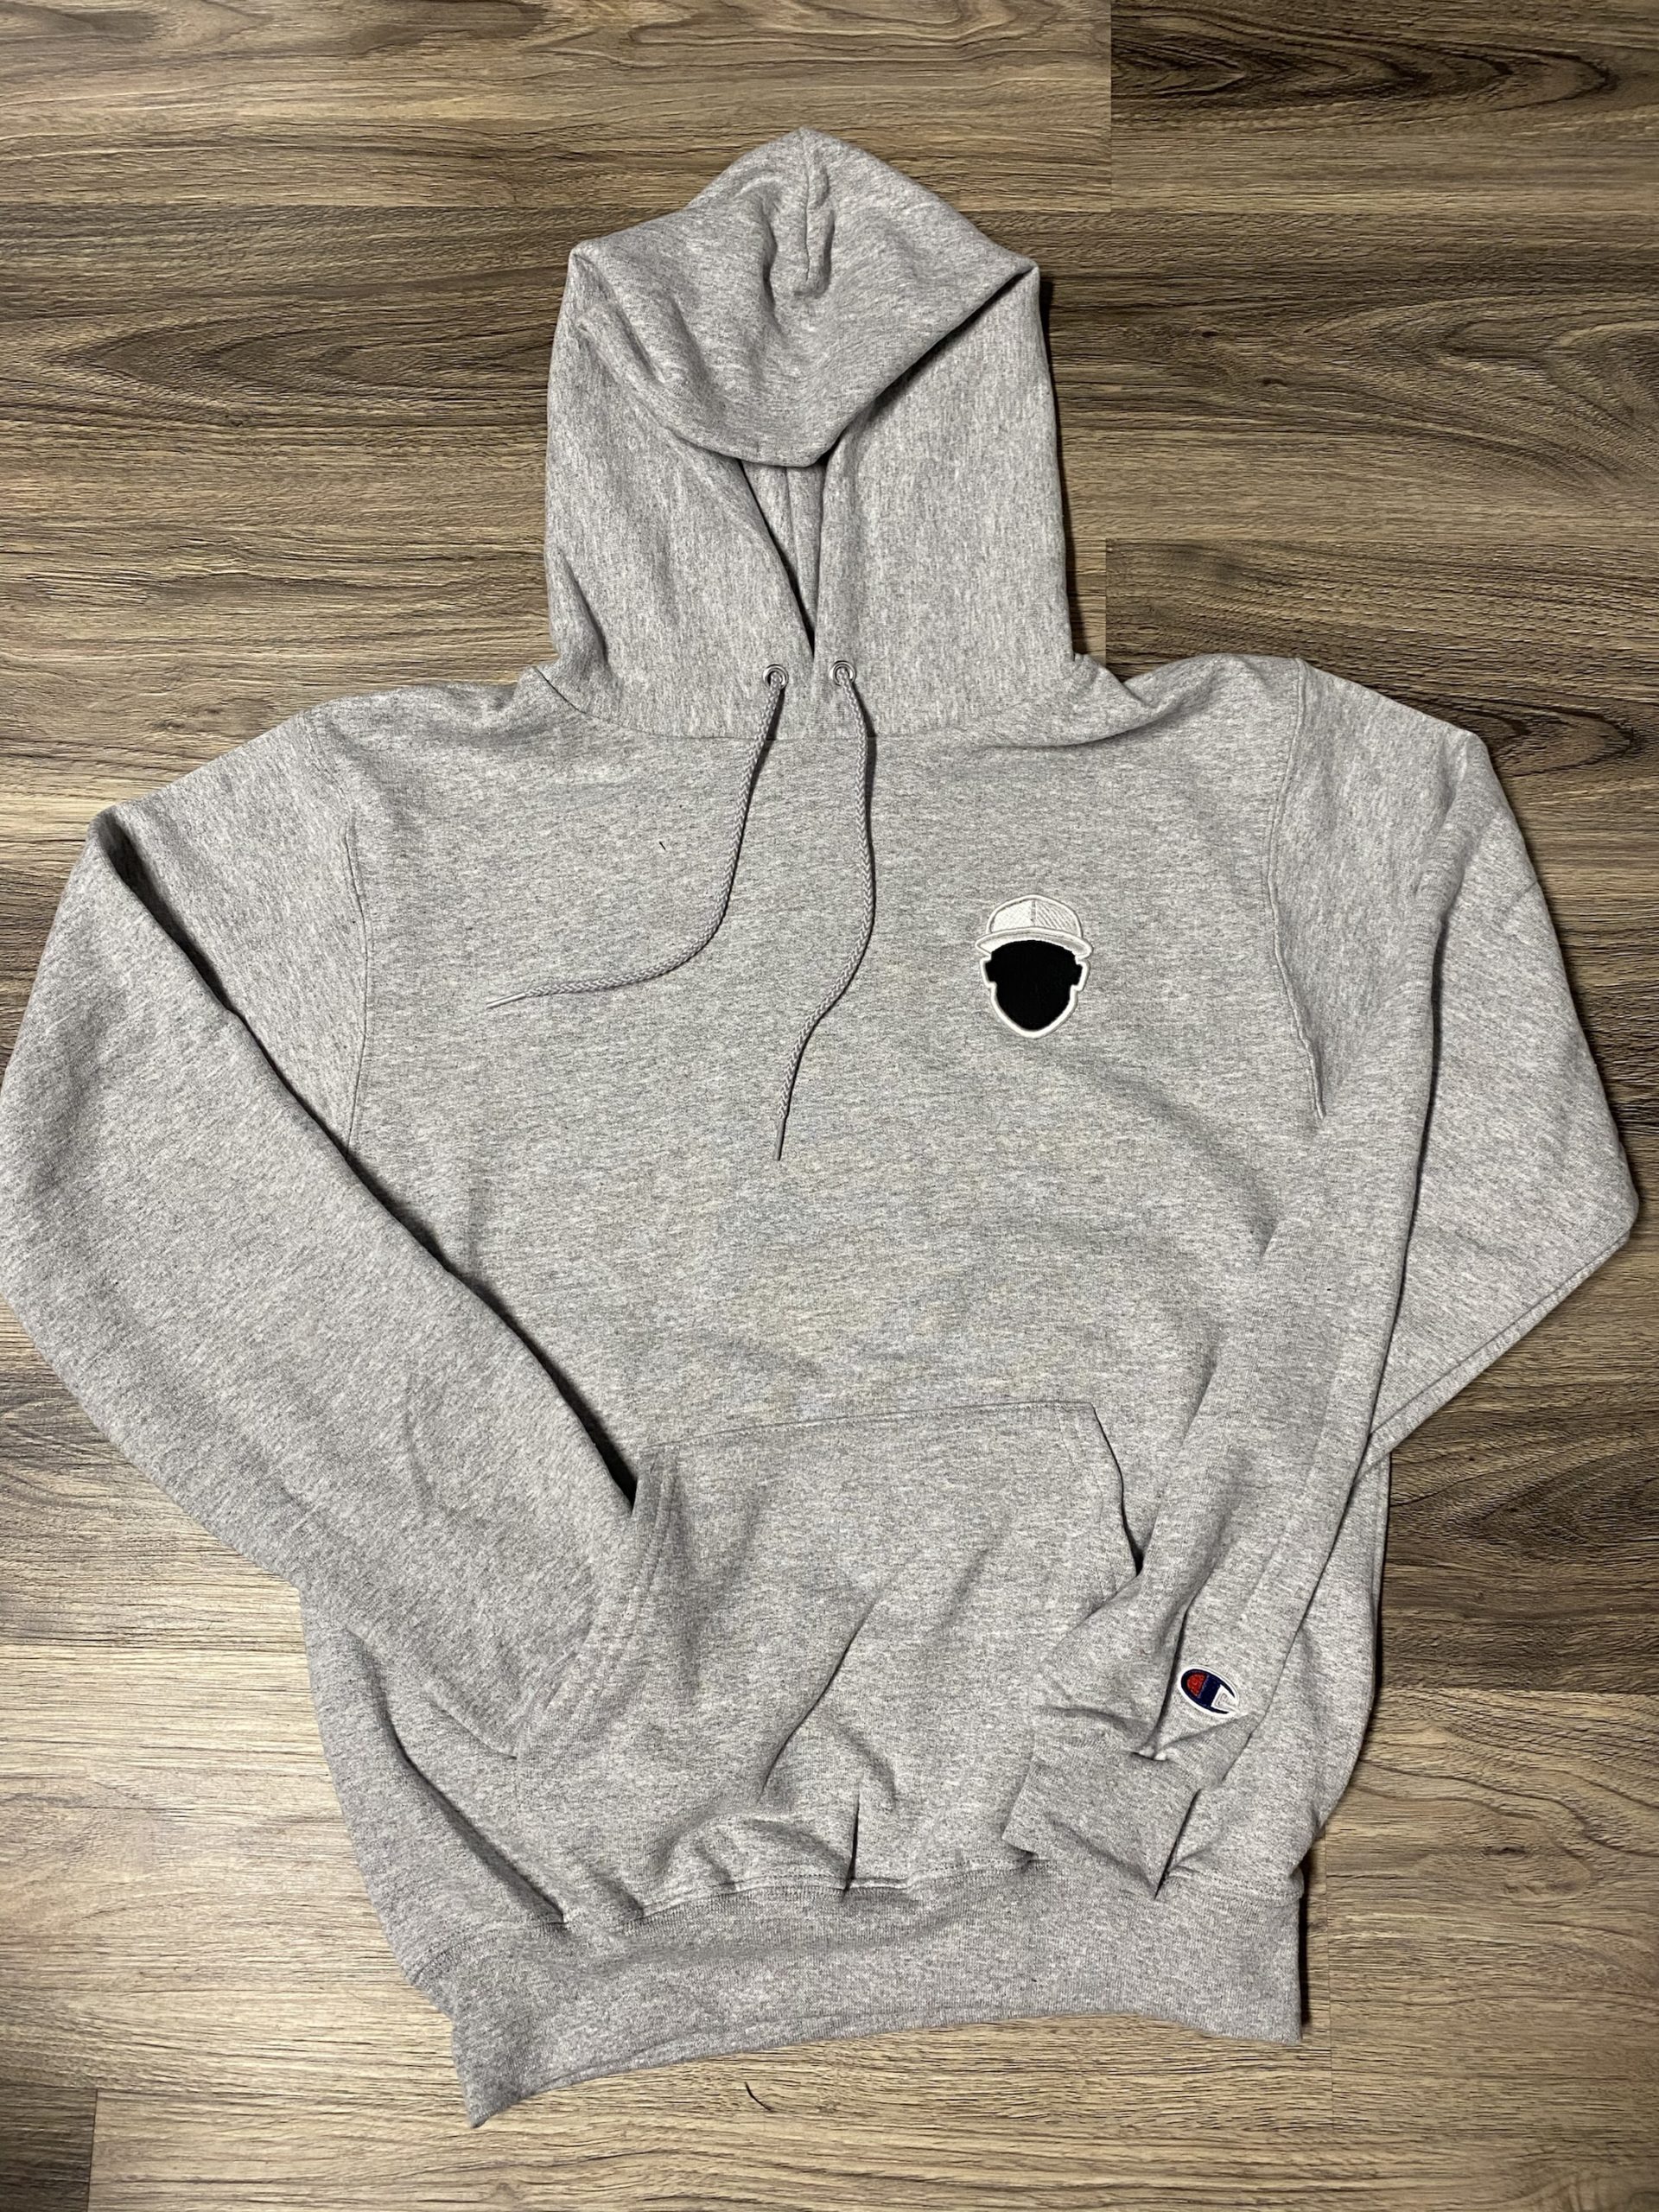 Inside out Champion Hoodie – thatvitiligoguy